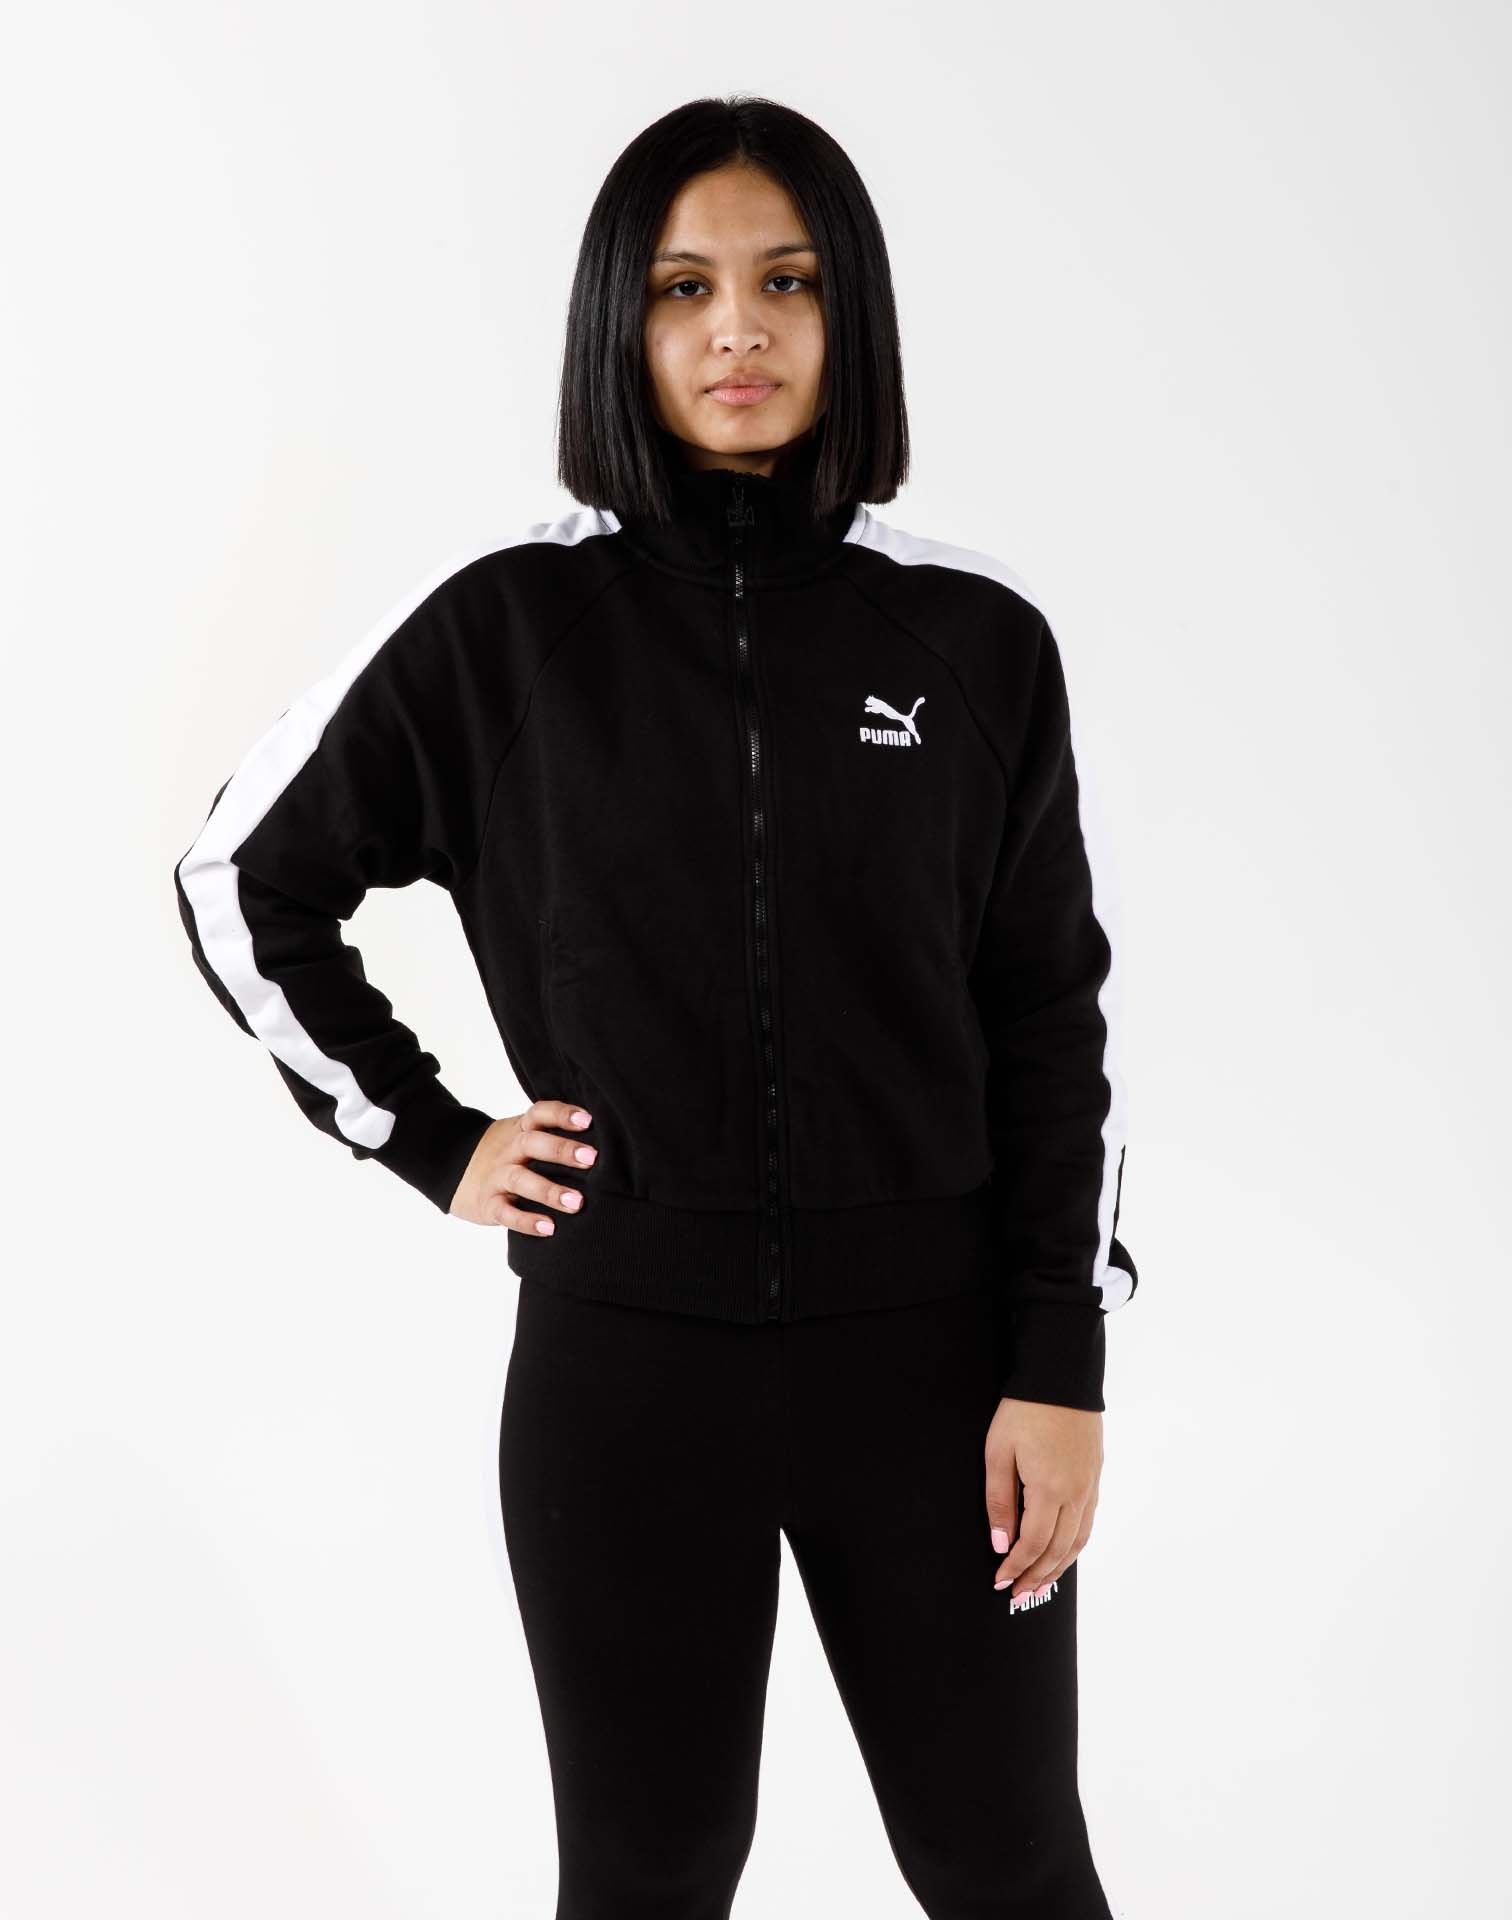 T7 – Puma Track Iconic DTLR Jacket